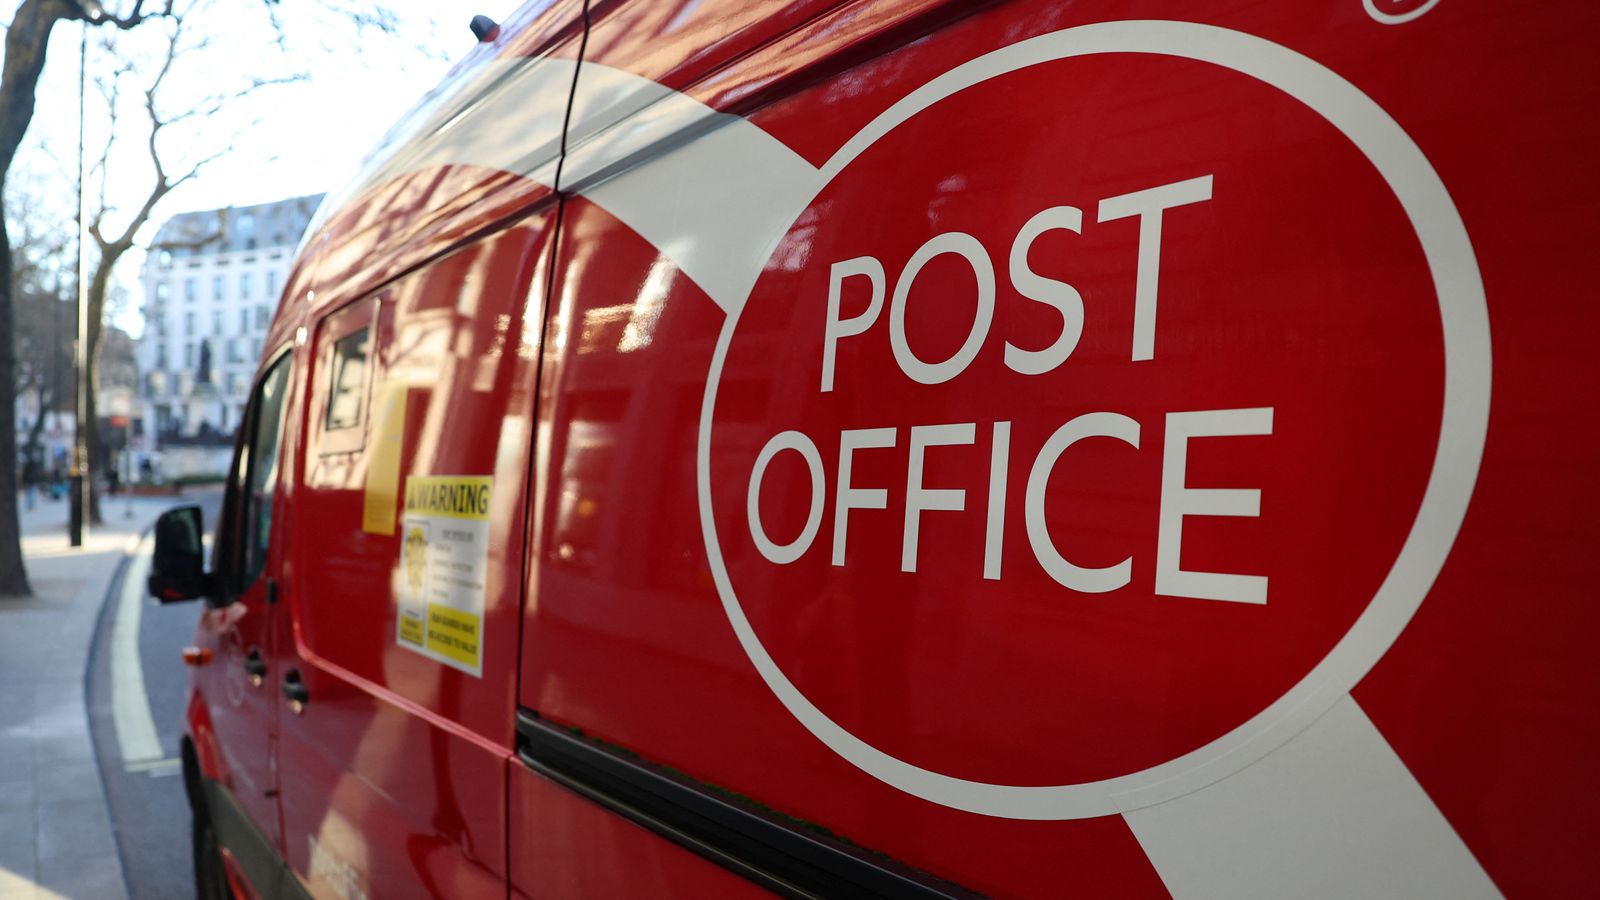 Exonerating guilty people 'price worth paying' to resolve Post Office scandal, government says